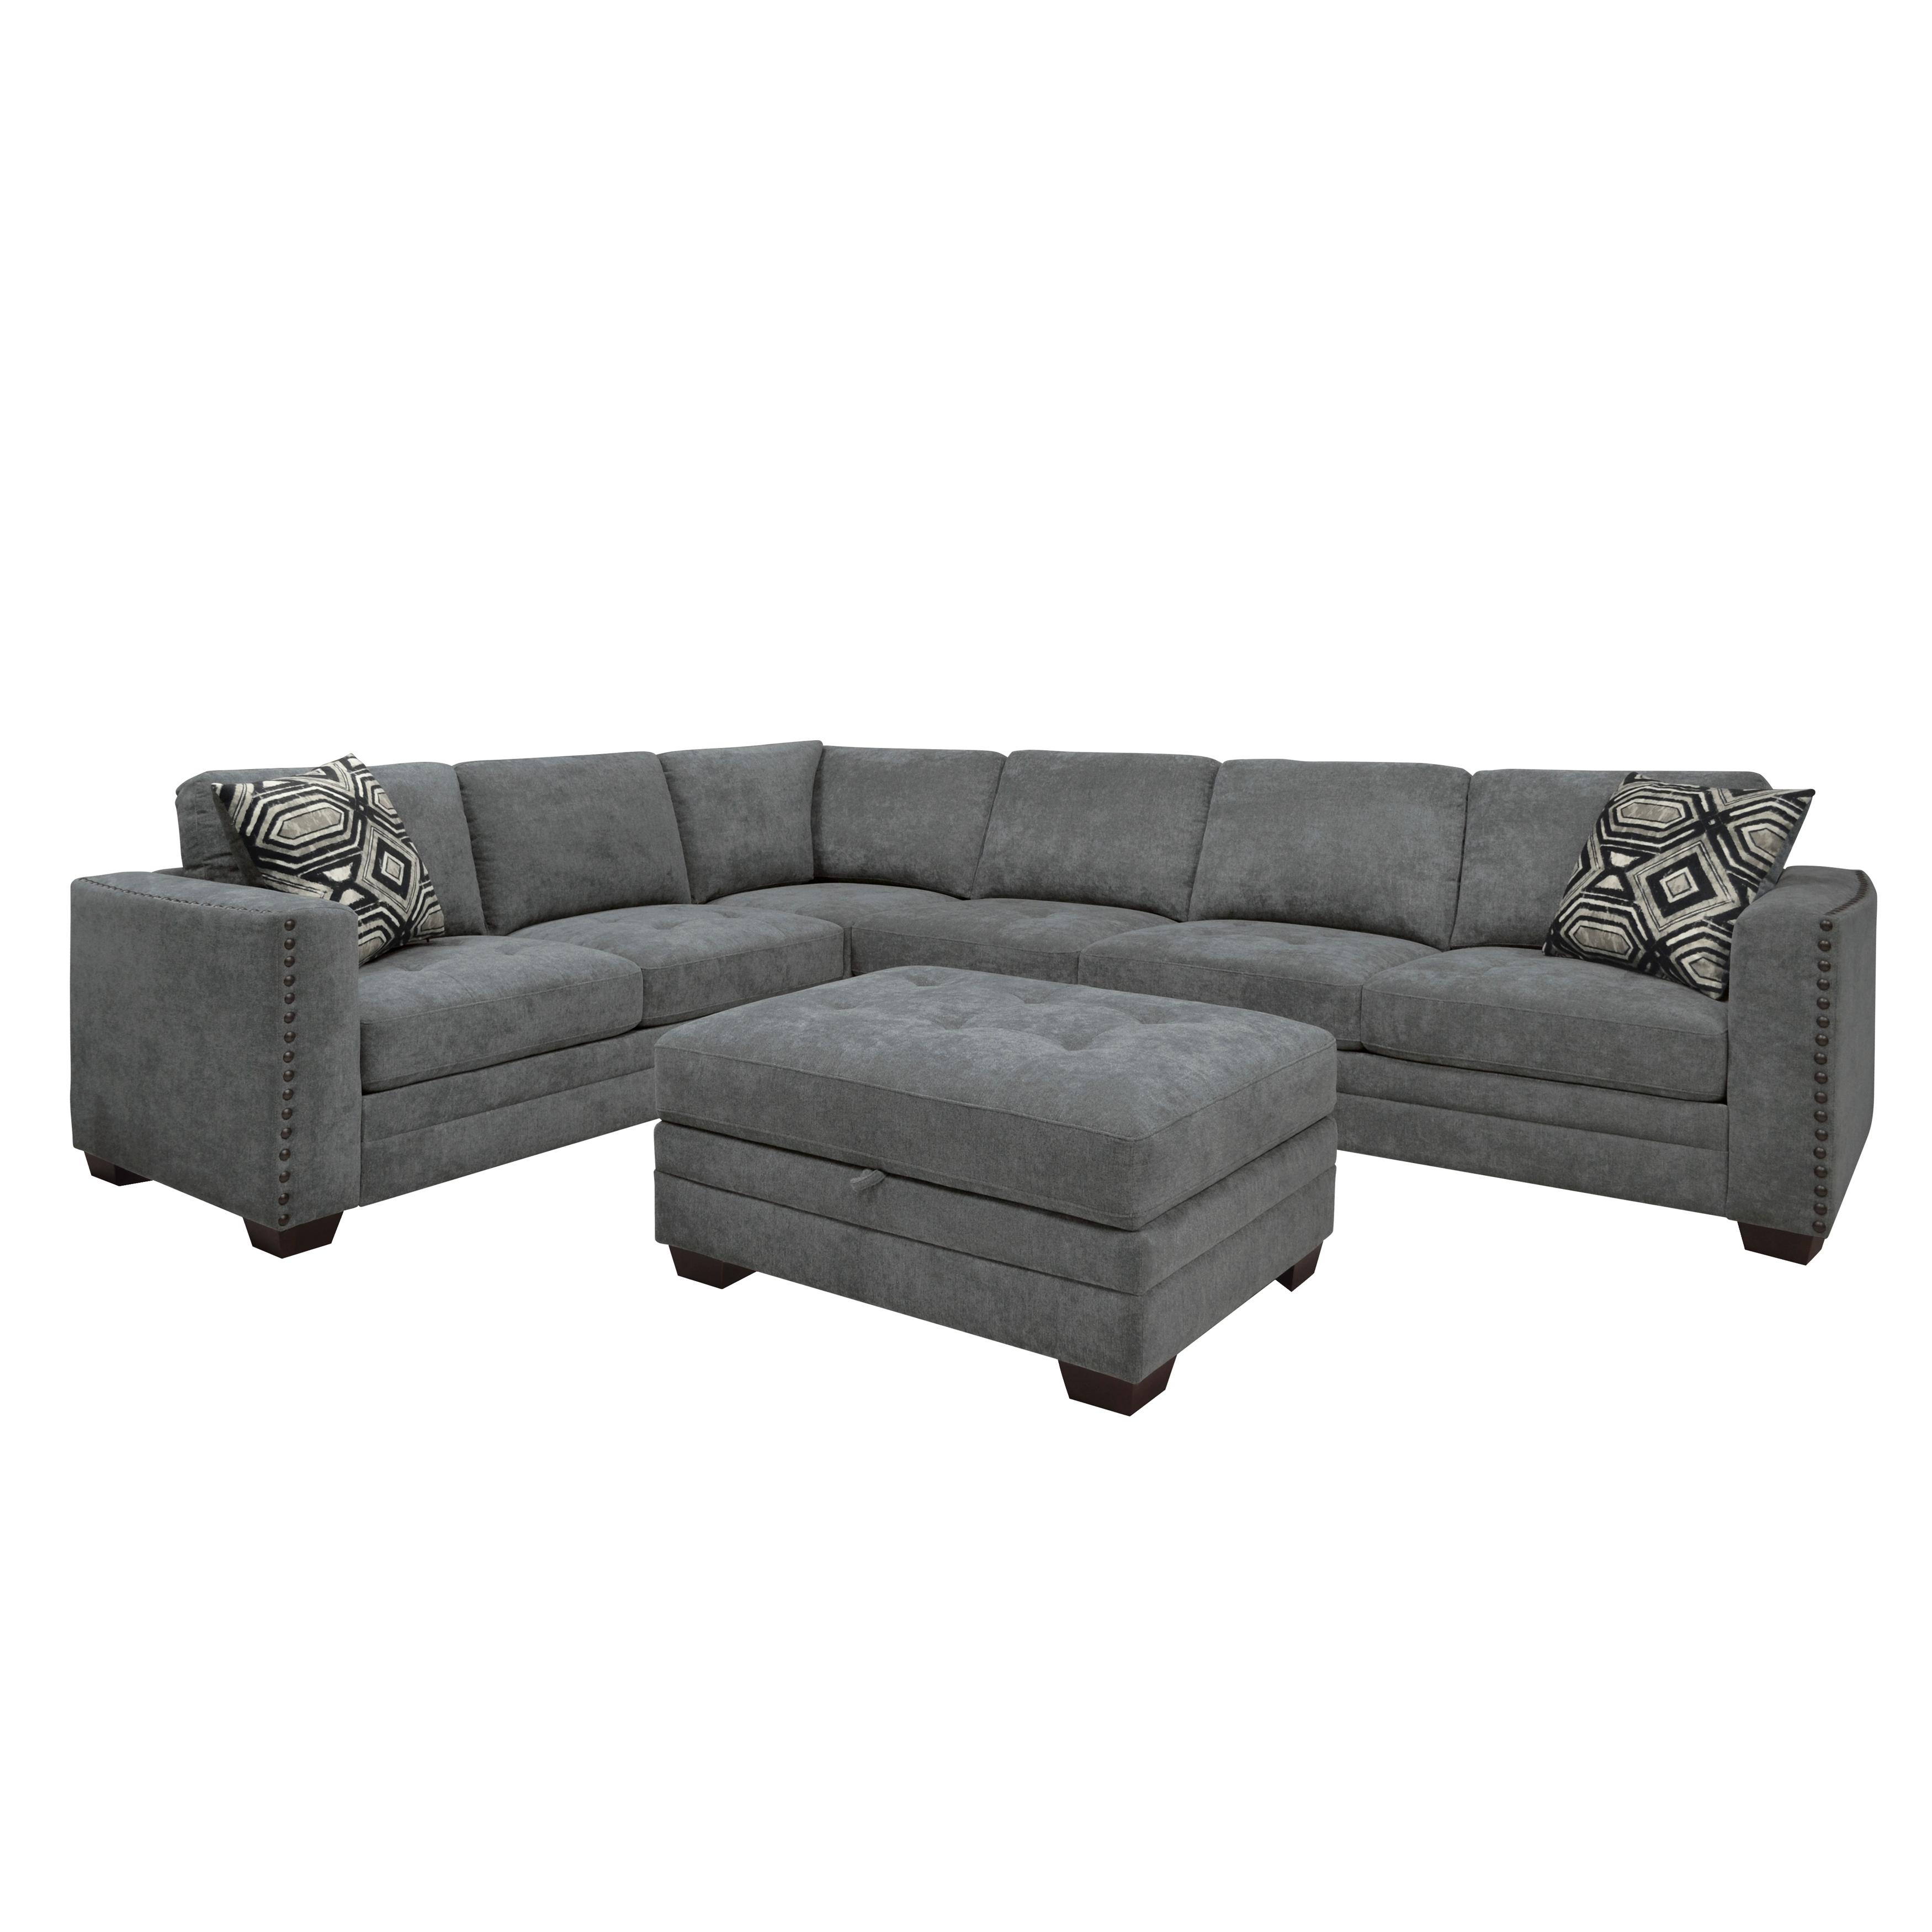 Transitional Sectional w/ Ottoman 9212GRY*3OT Sidney 9212GRY*3OT in Gray 